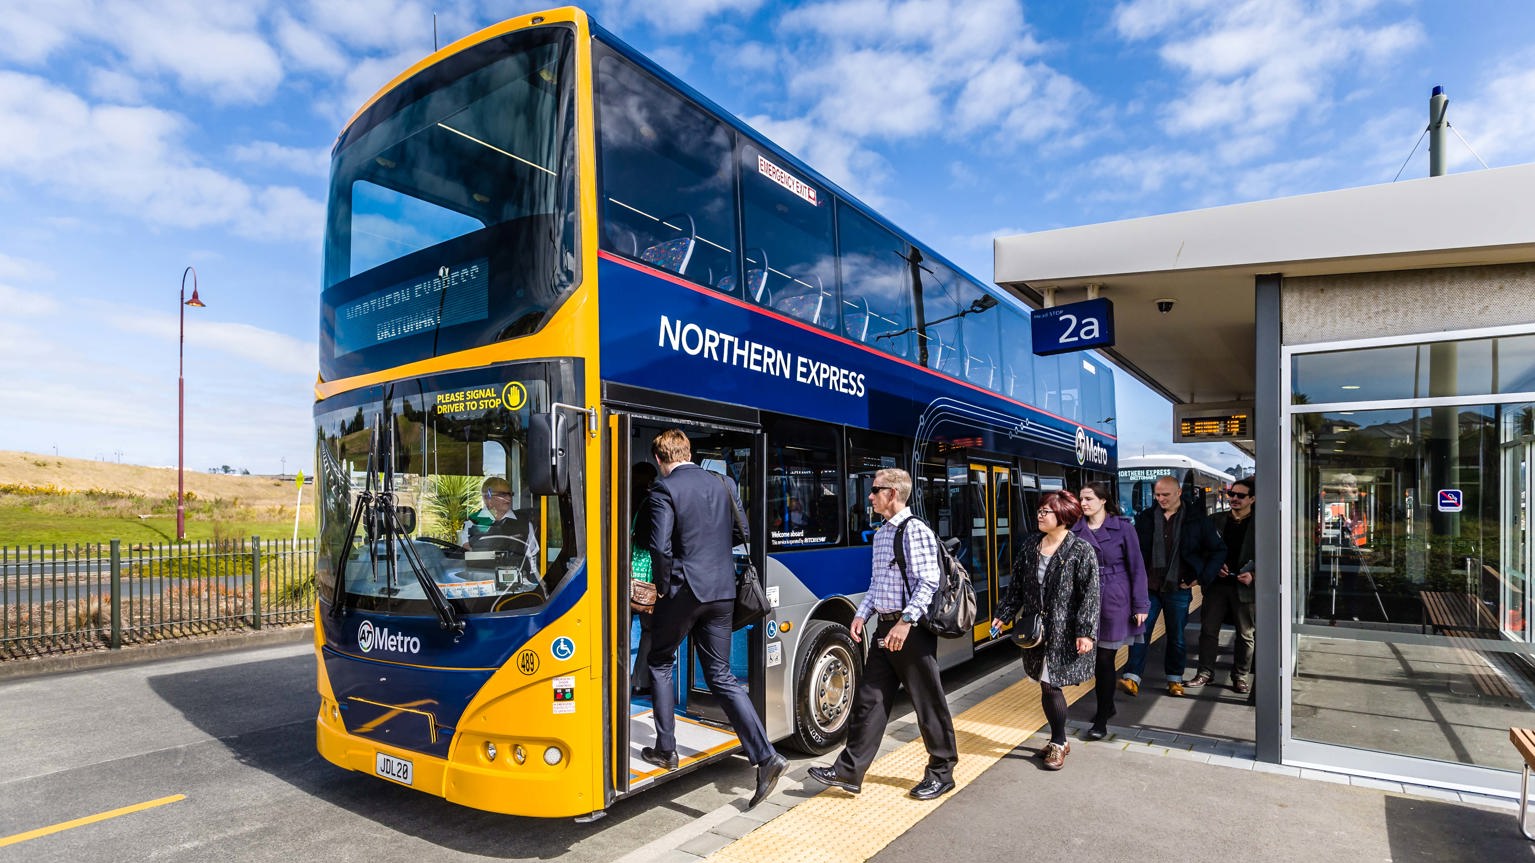 Image of several commuters boarding a yellow Northern Express double-decker bus.